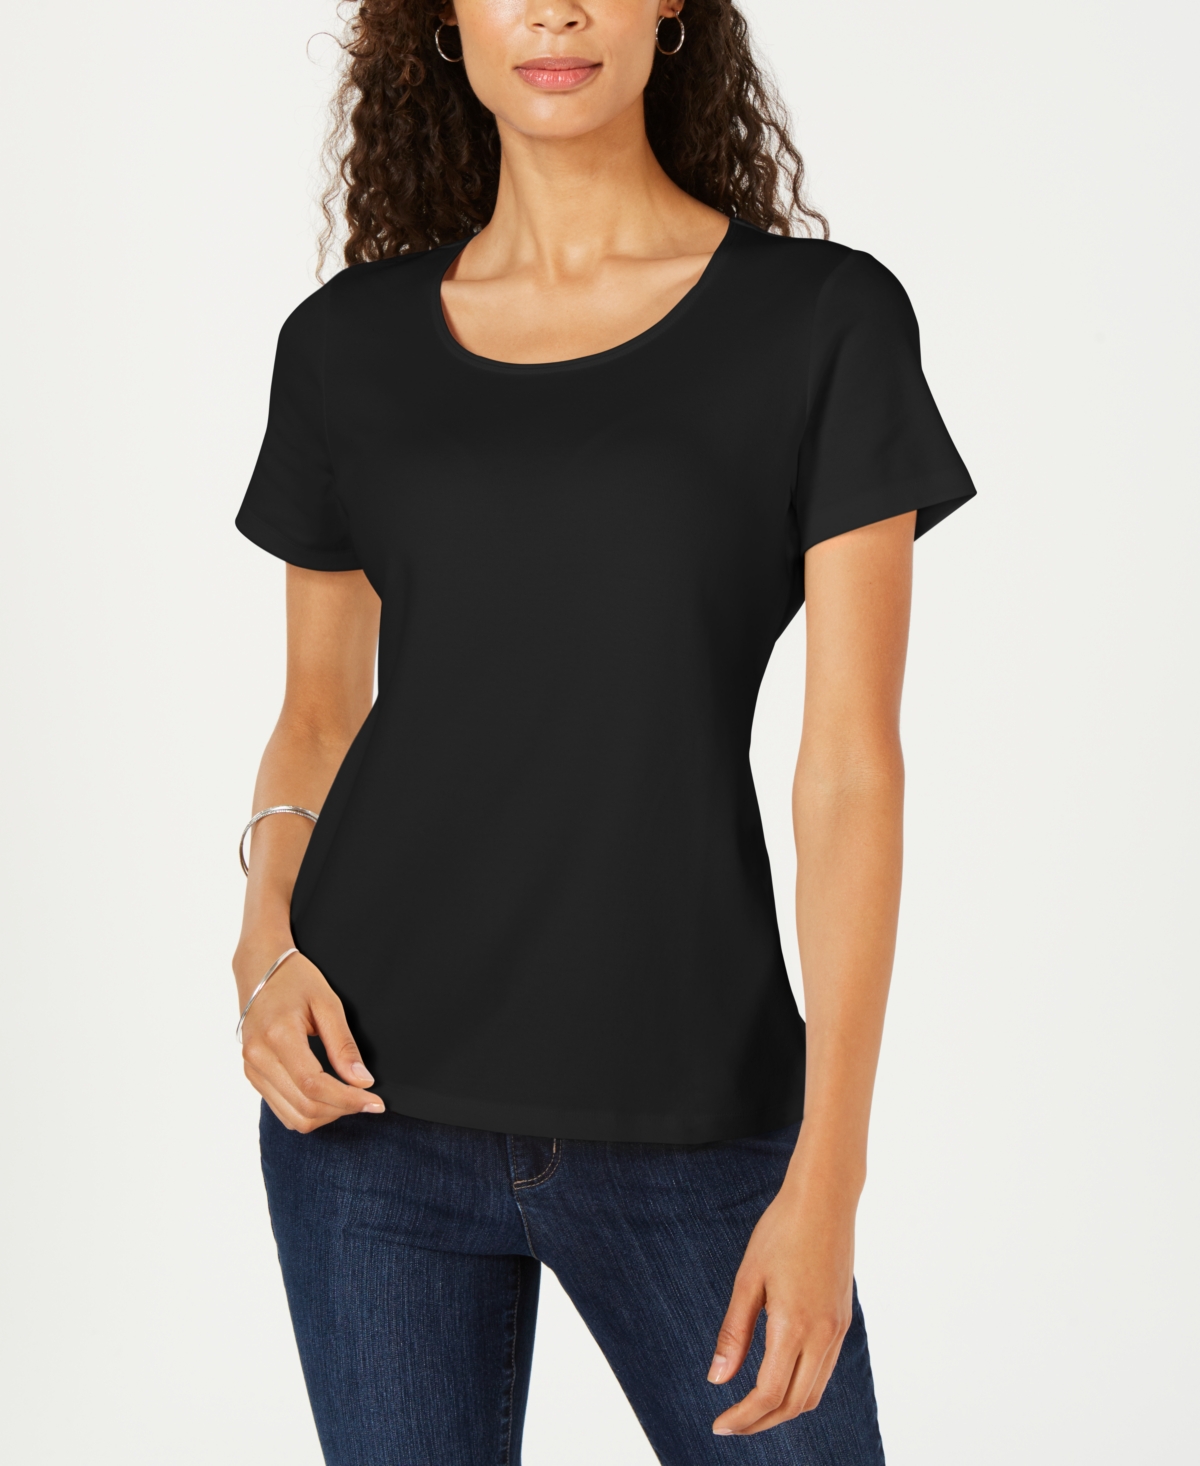 Petite Cotton Scoop-Neck Top, Created for Macy's - Bright White